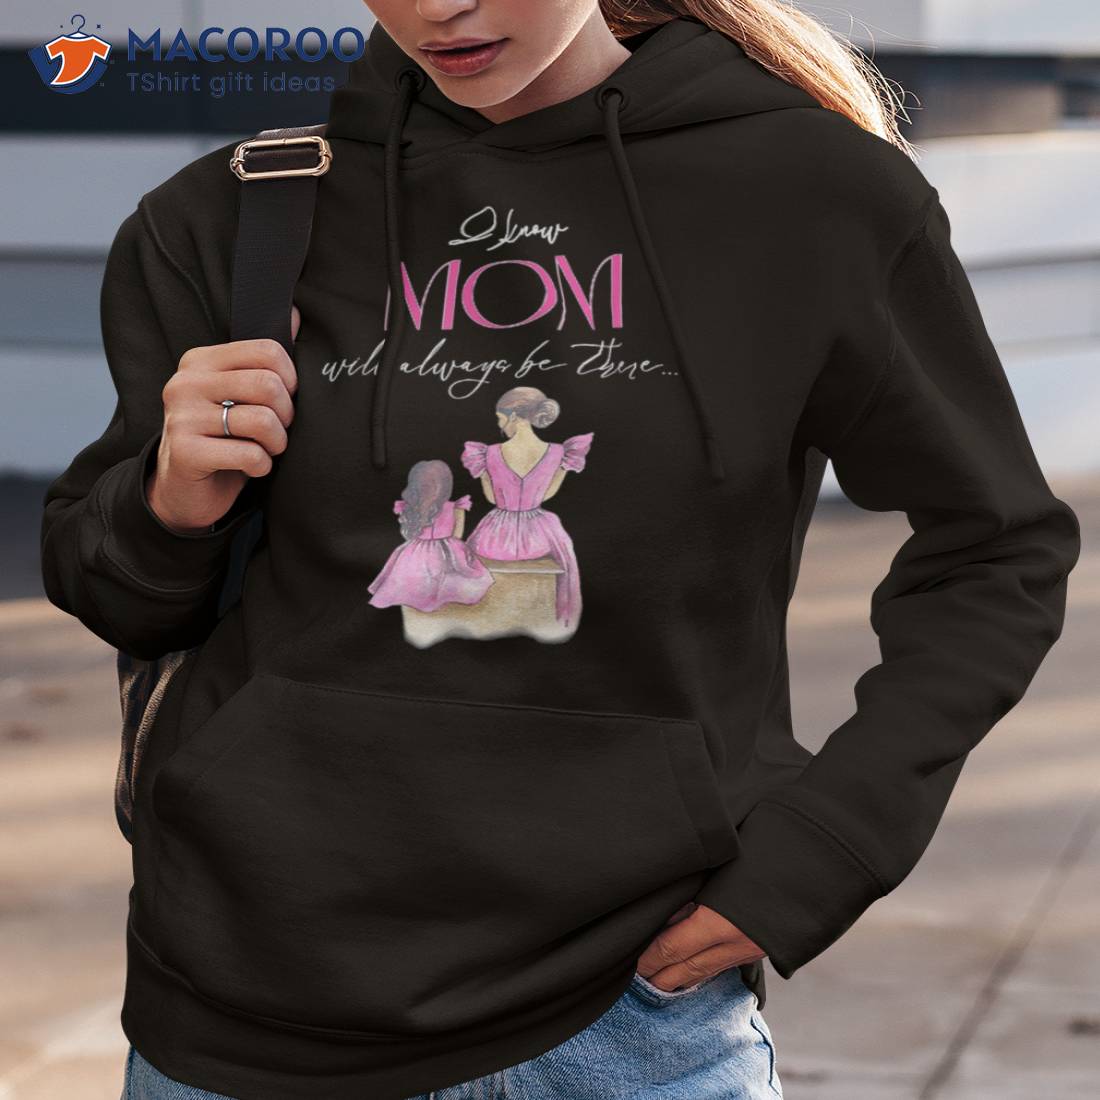 https://images.macoroo.com/wp-content/uploads/2023/05/ladies-super-mom-great-mother-s-day-gifts-for-shirt-hoodie-3.jpg